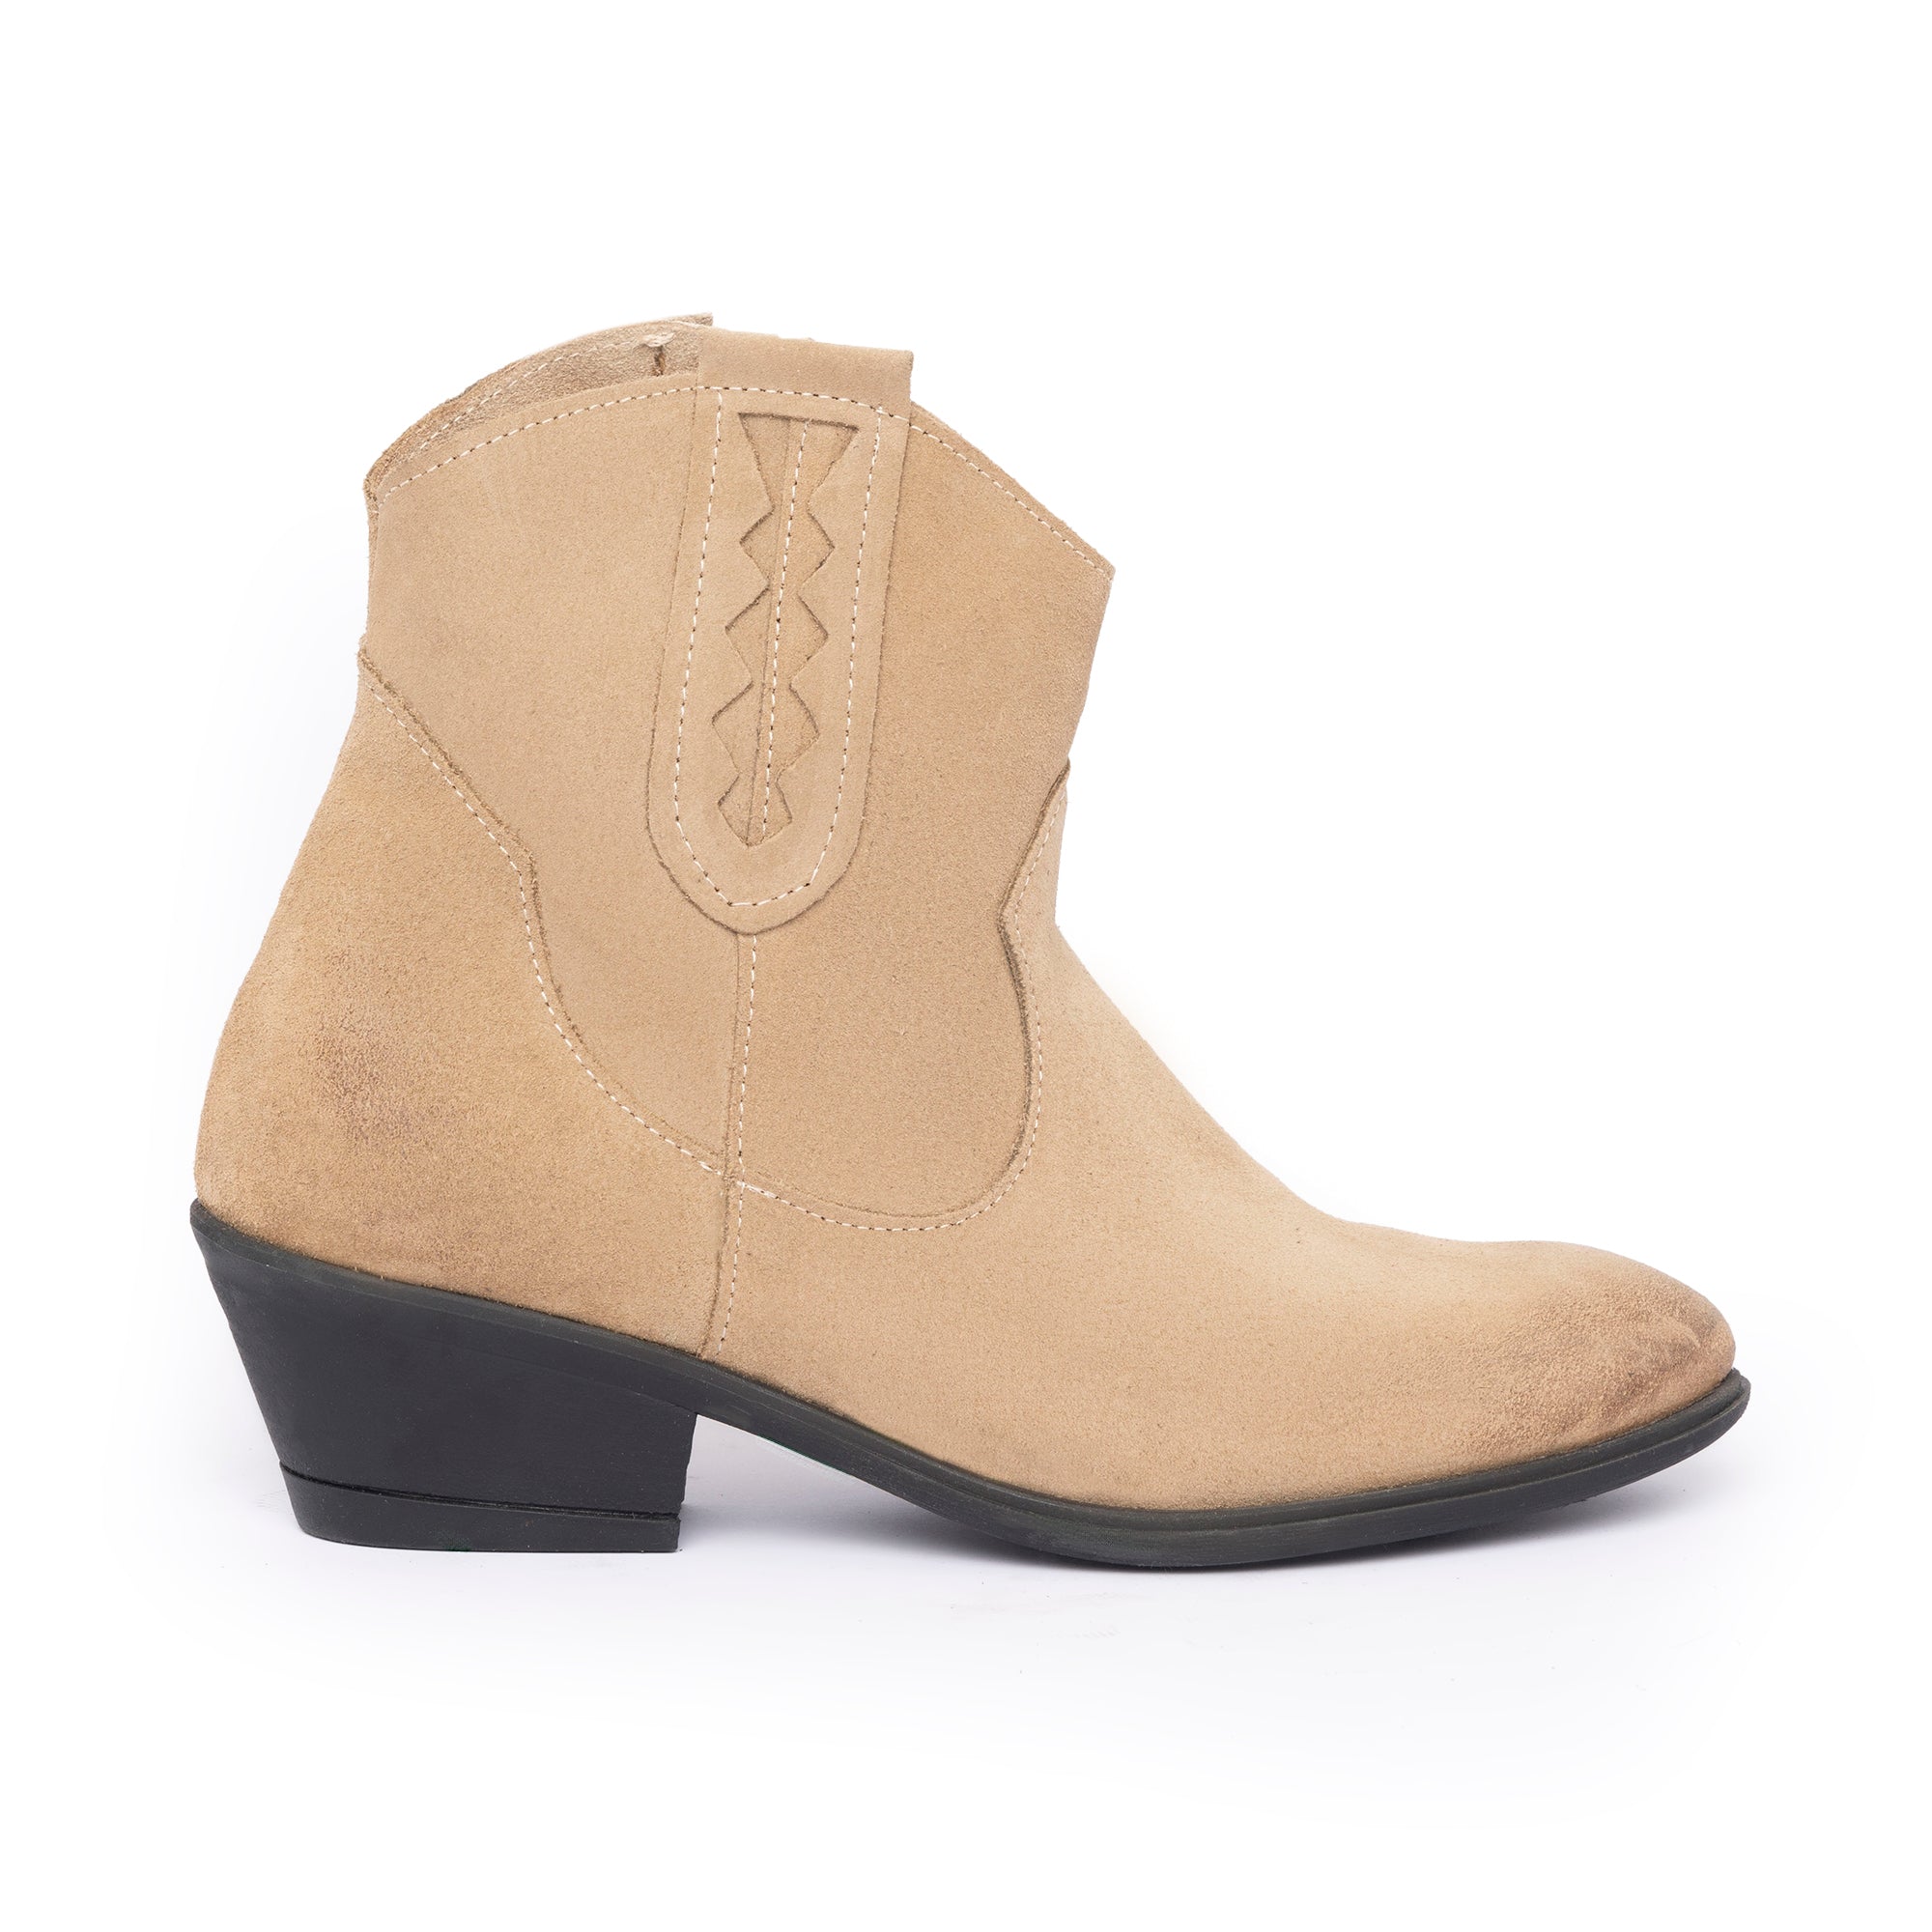 Texan ankle boots - Taupe